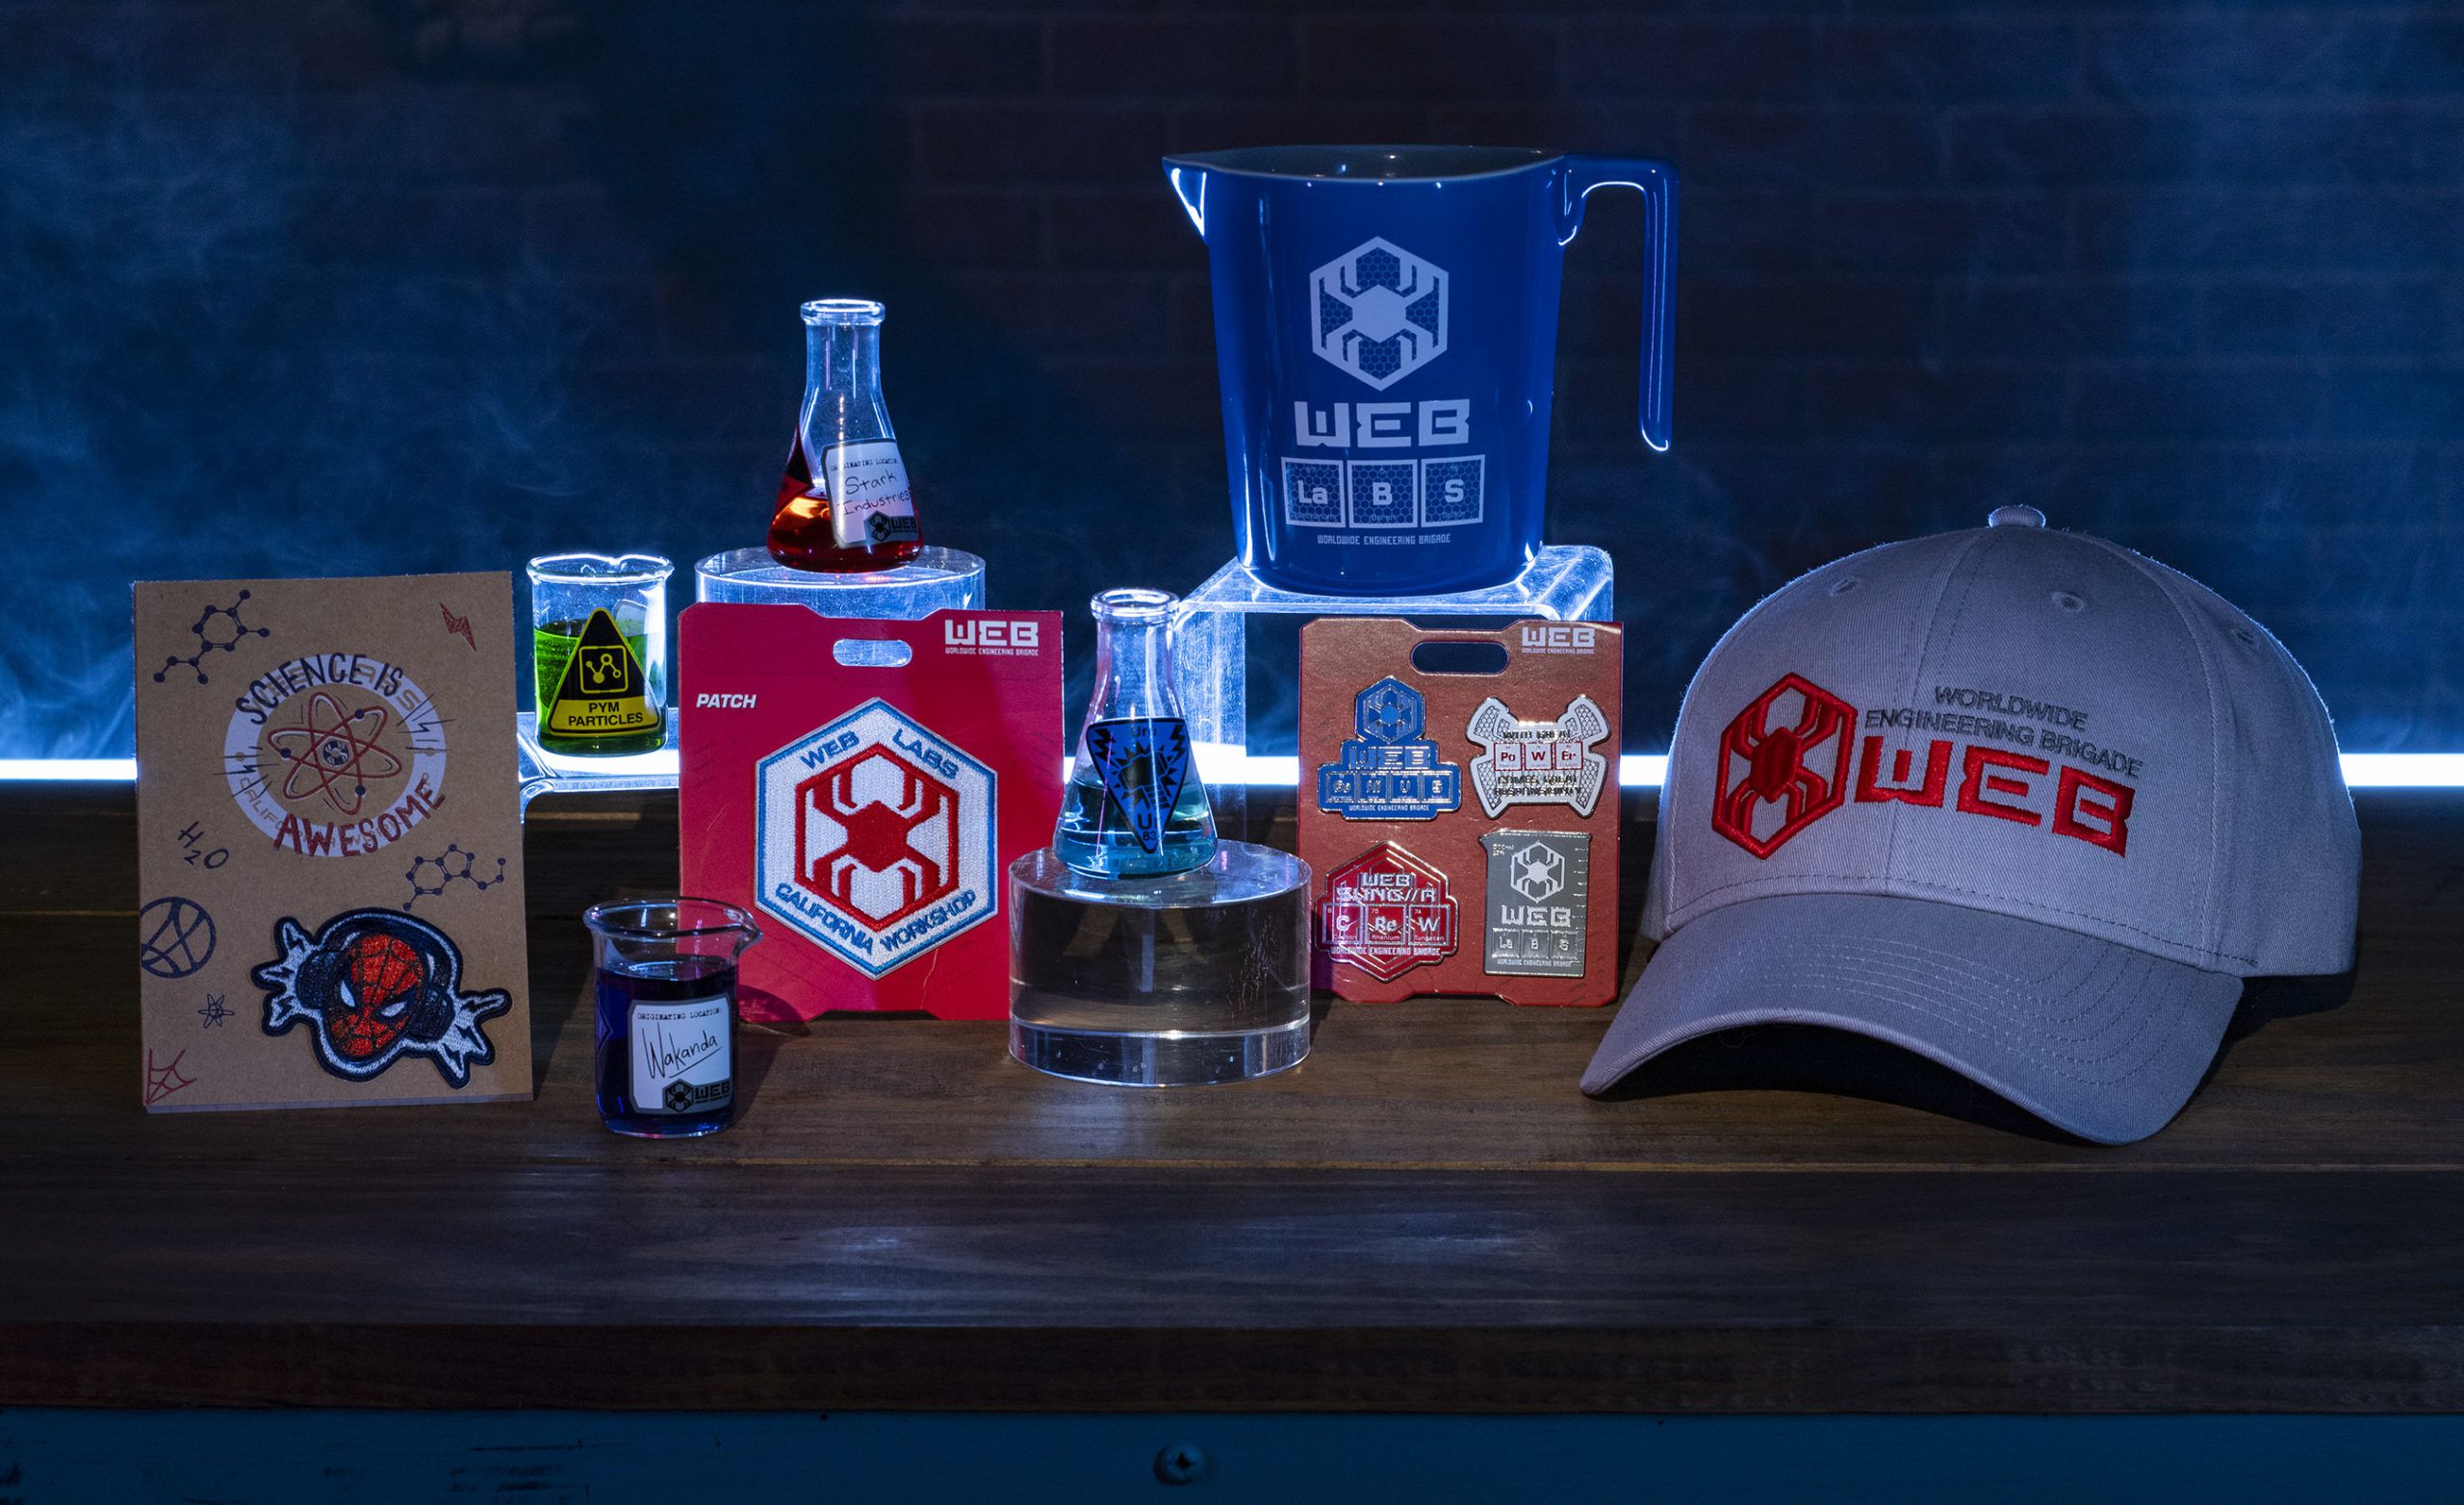 In Avengers Campus at Disney California Adventure Park in Anaheim, California, guests can commemorate their successful recruitment with a variety of household and novelty items including beaker-inspired mugs, toothpick holders, notepads, trading pins and patches. (David Roark/Disneyland Resort)